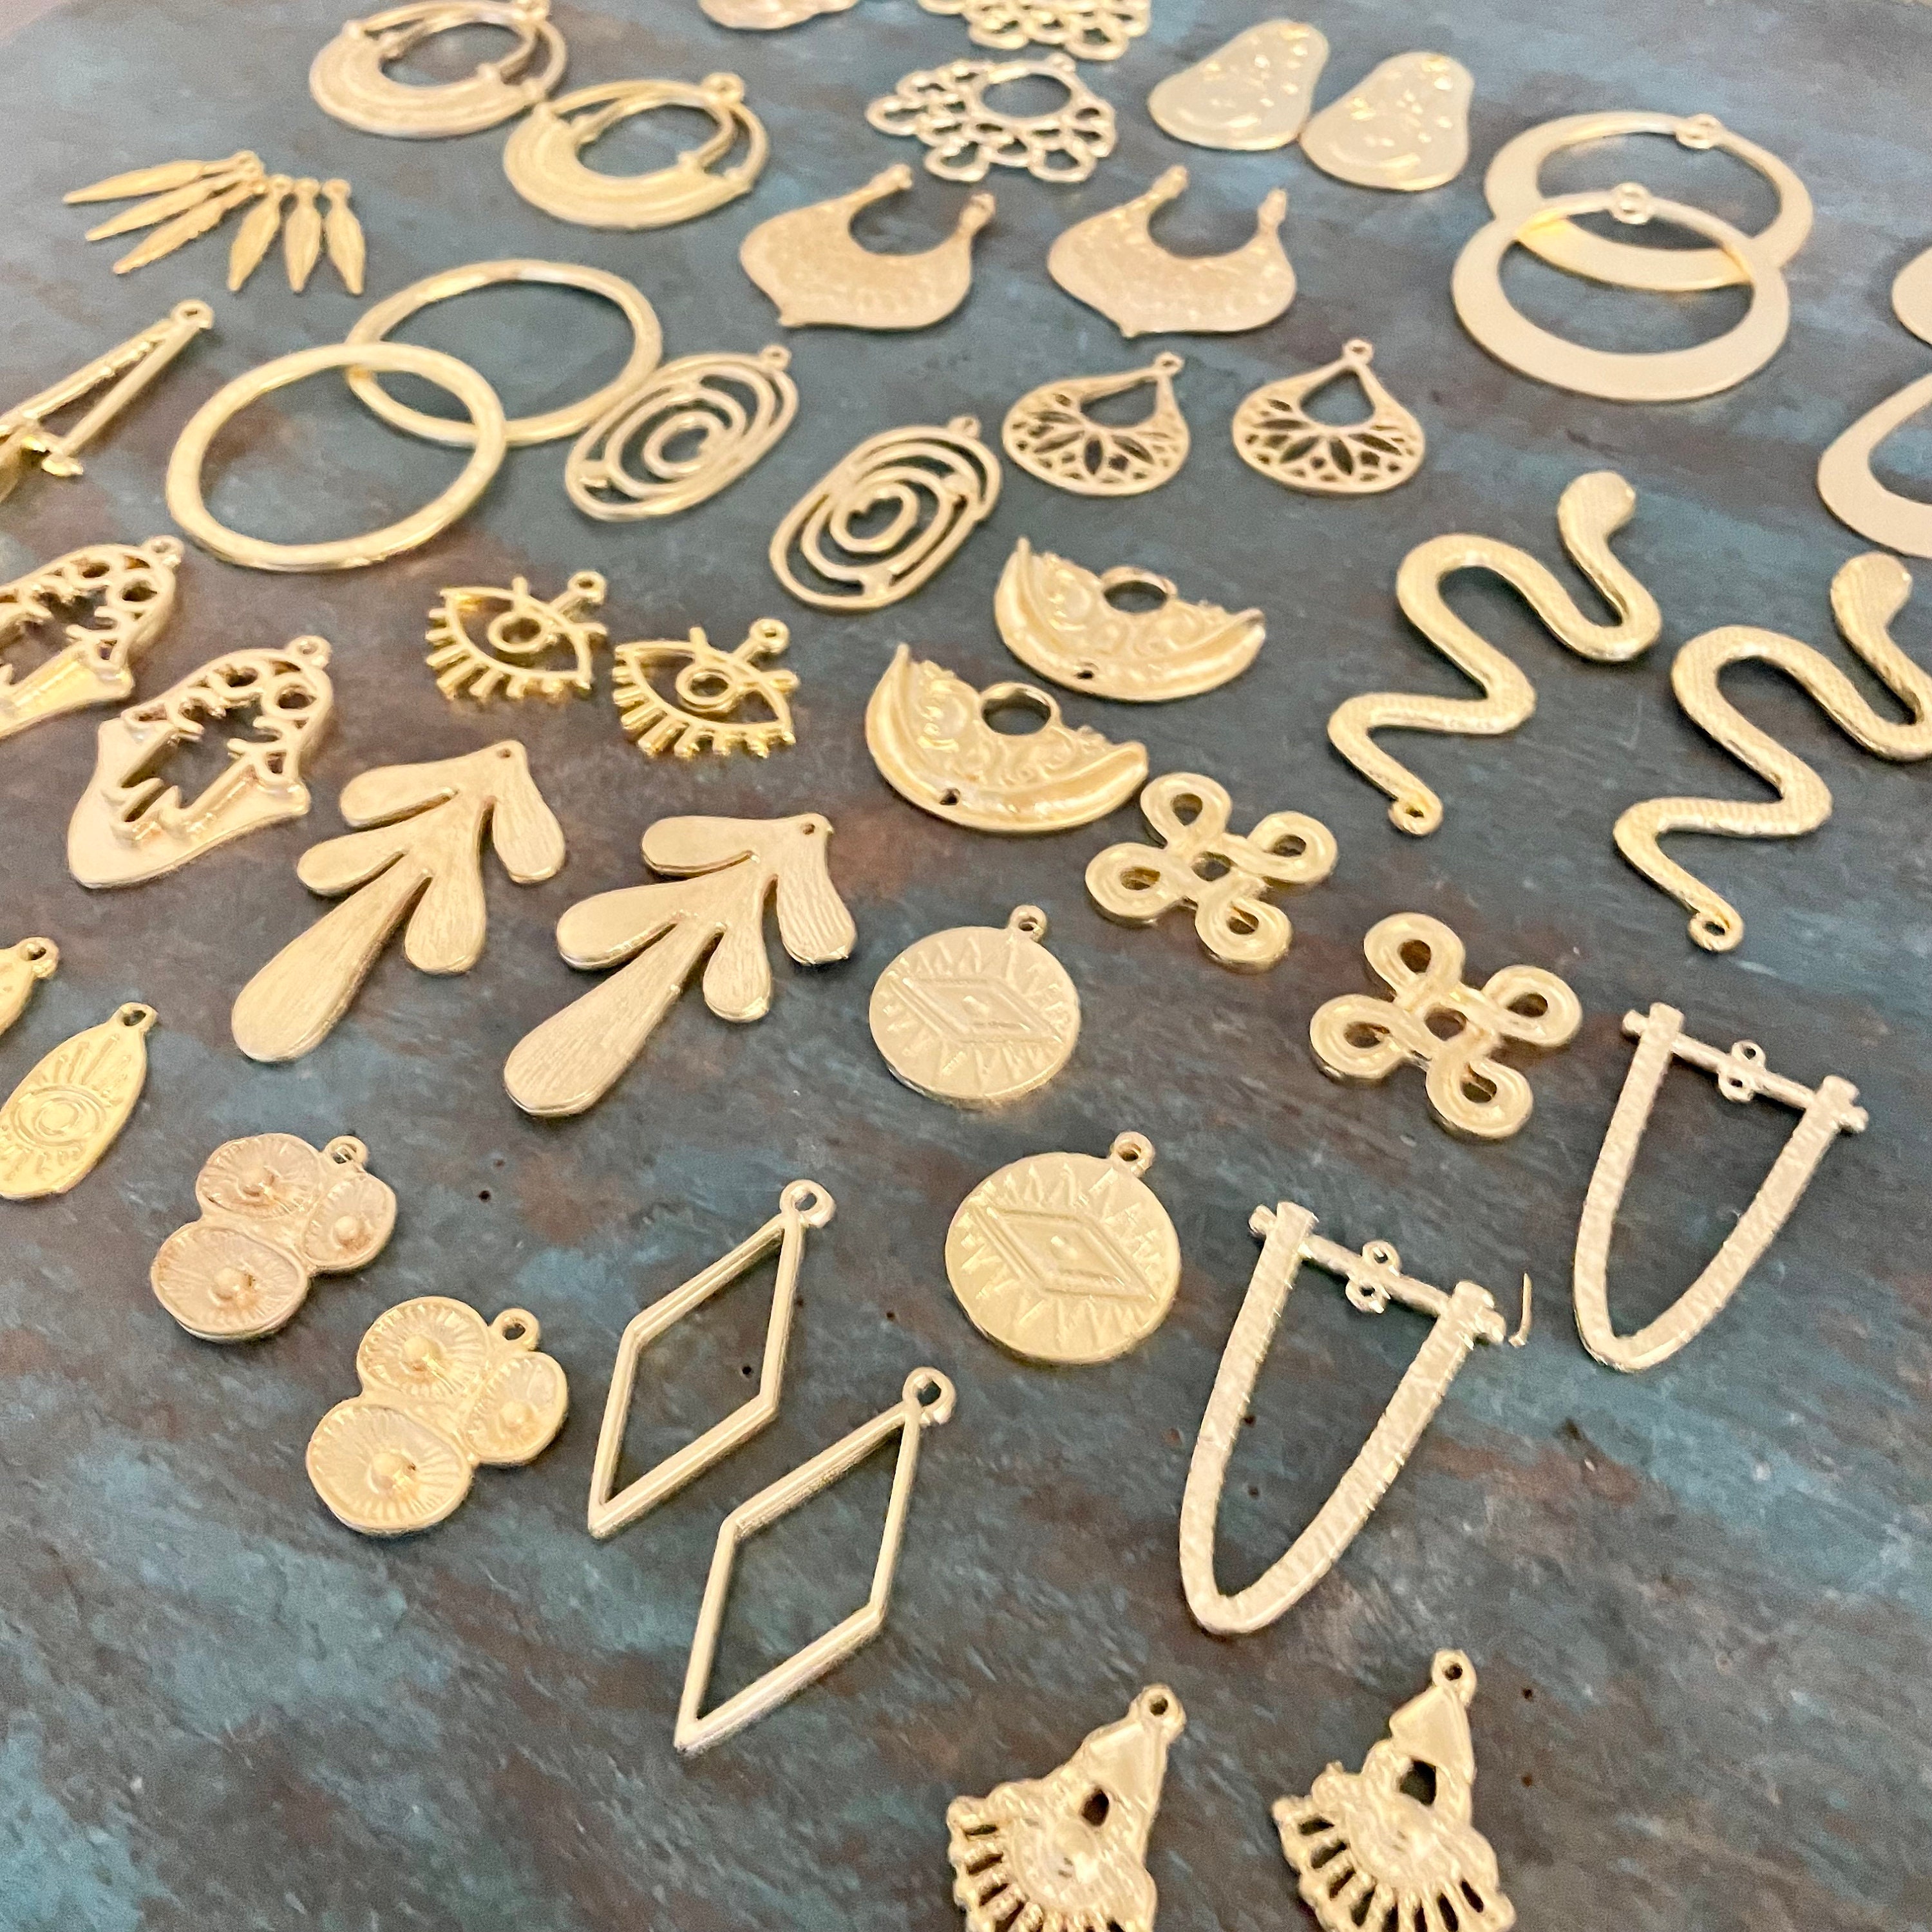 Buy 56 PCS Gold Coated Brass Earring Findings One Set, Endless  Possibilities. Wholesale Earring Findings for Jewelry Making Parts. Online  in India 